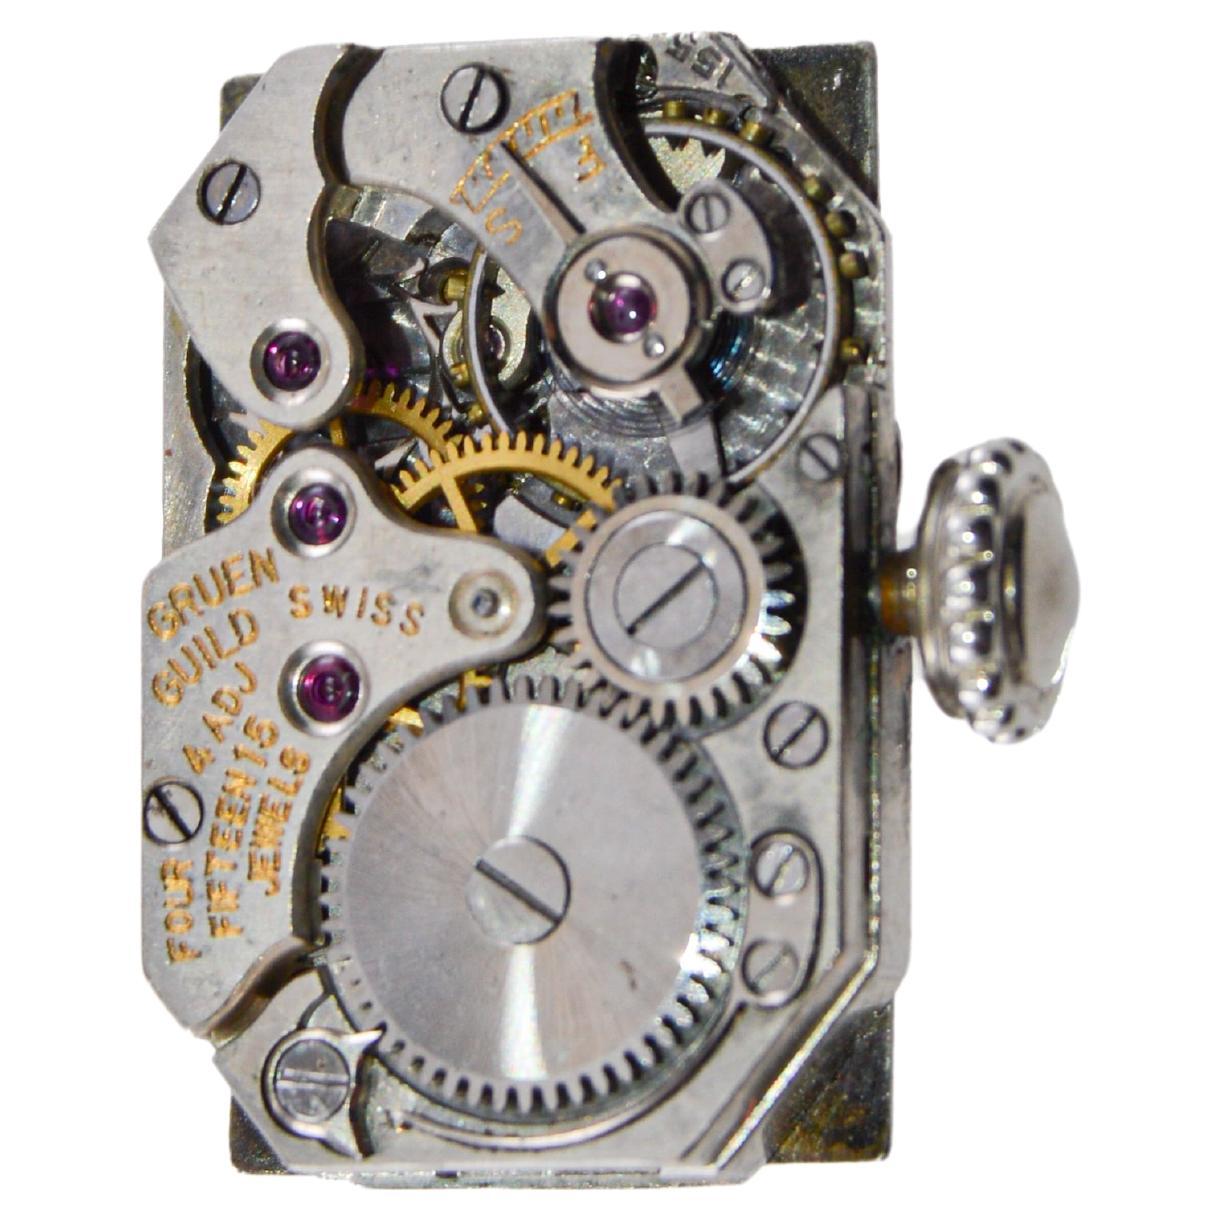 Gruen 14Kt White Gold Art Deco Watch with Hand Made Dial by Stern Freres 1920's For Sale 4